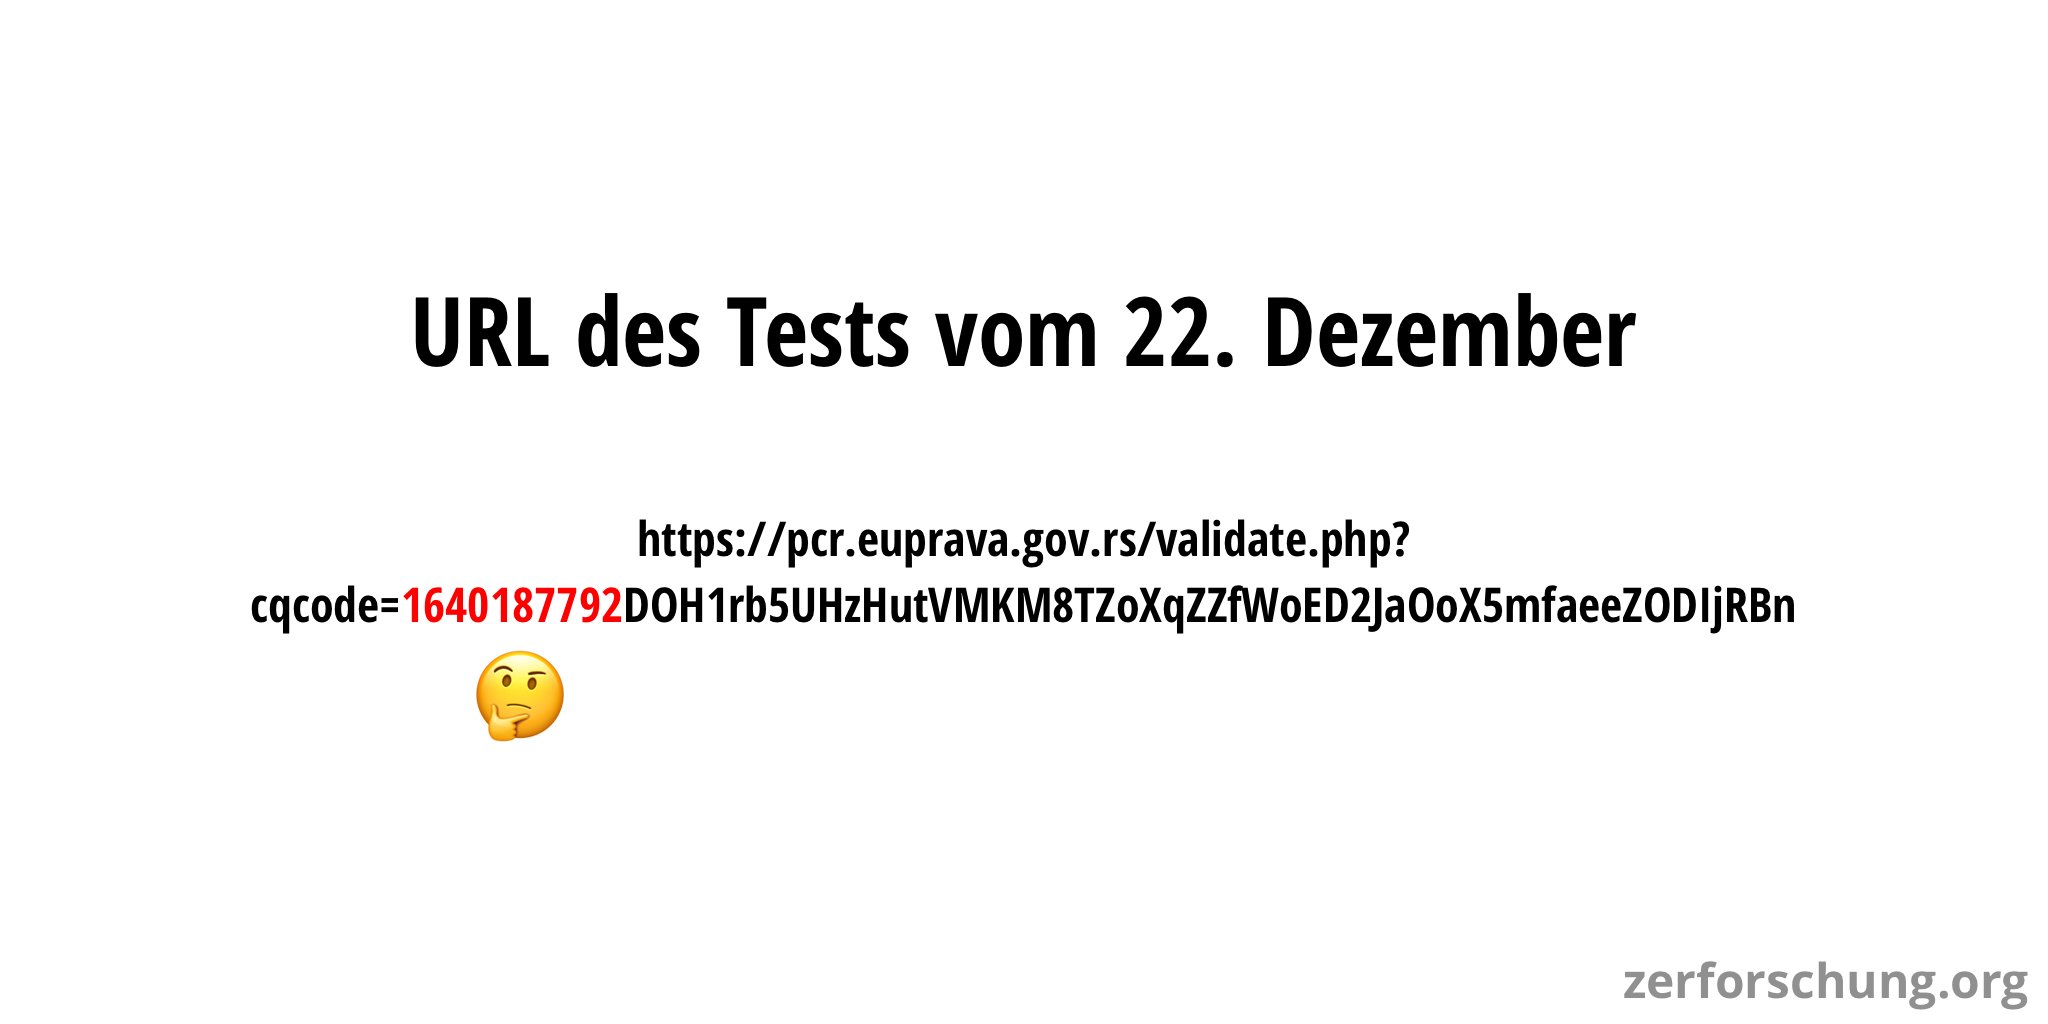 URL to the verification website of the December 22 test, with the timestamp section highlighted